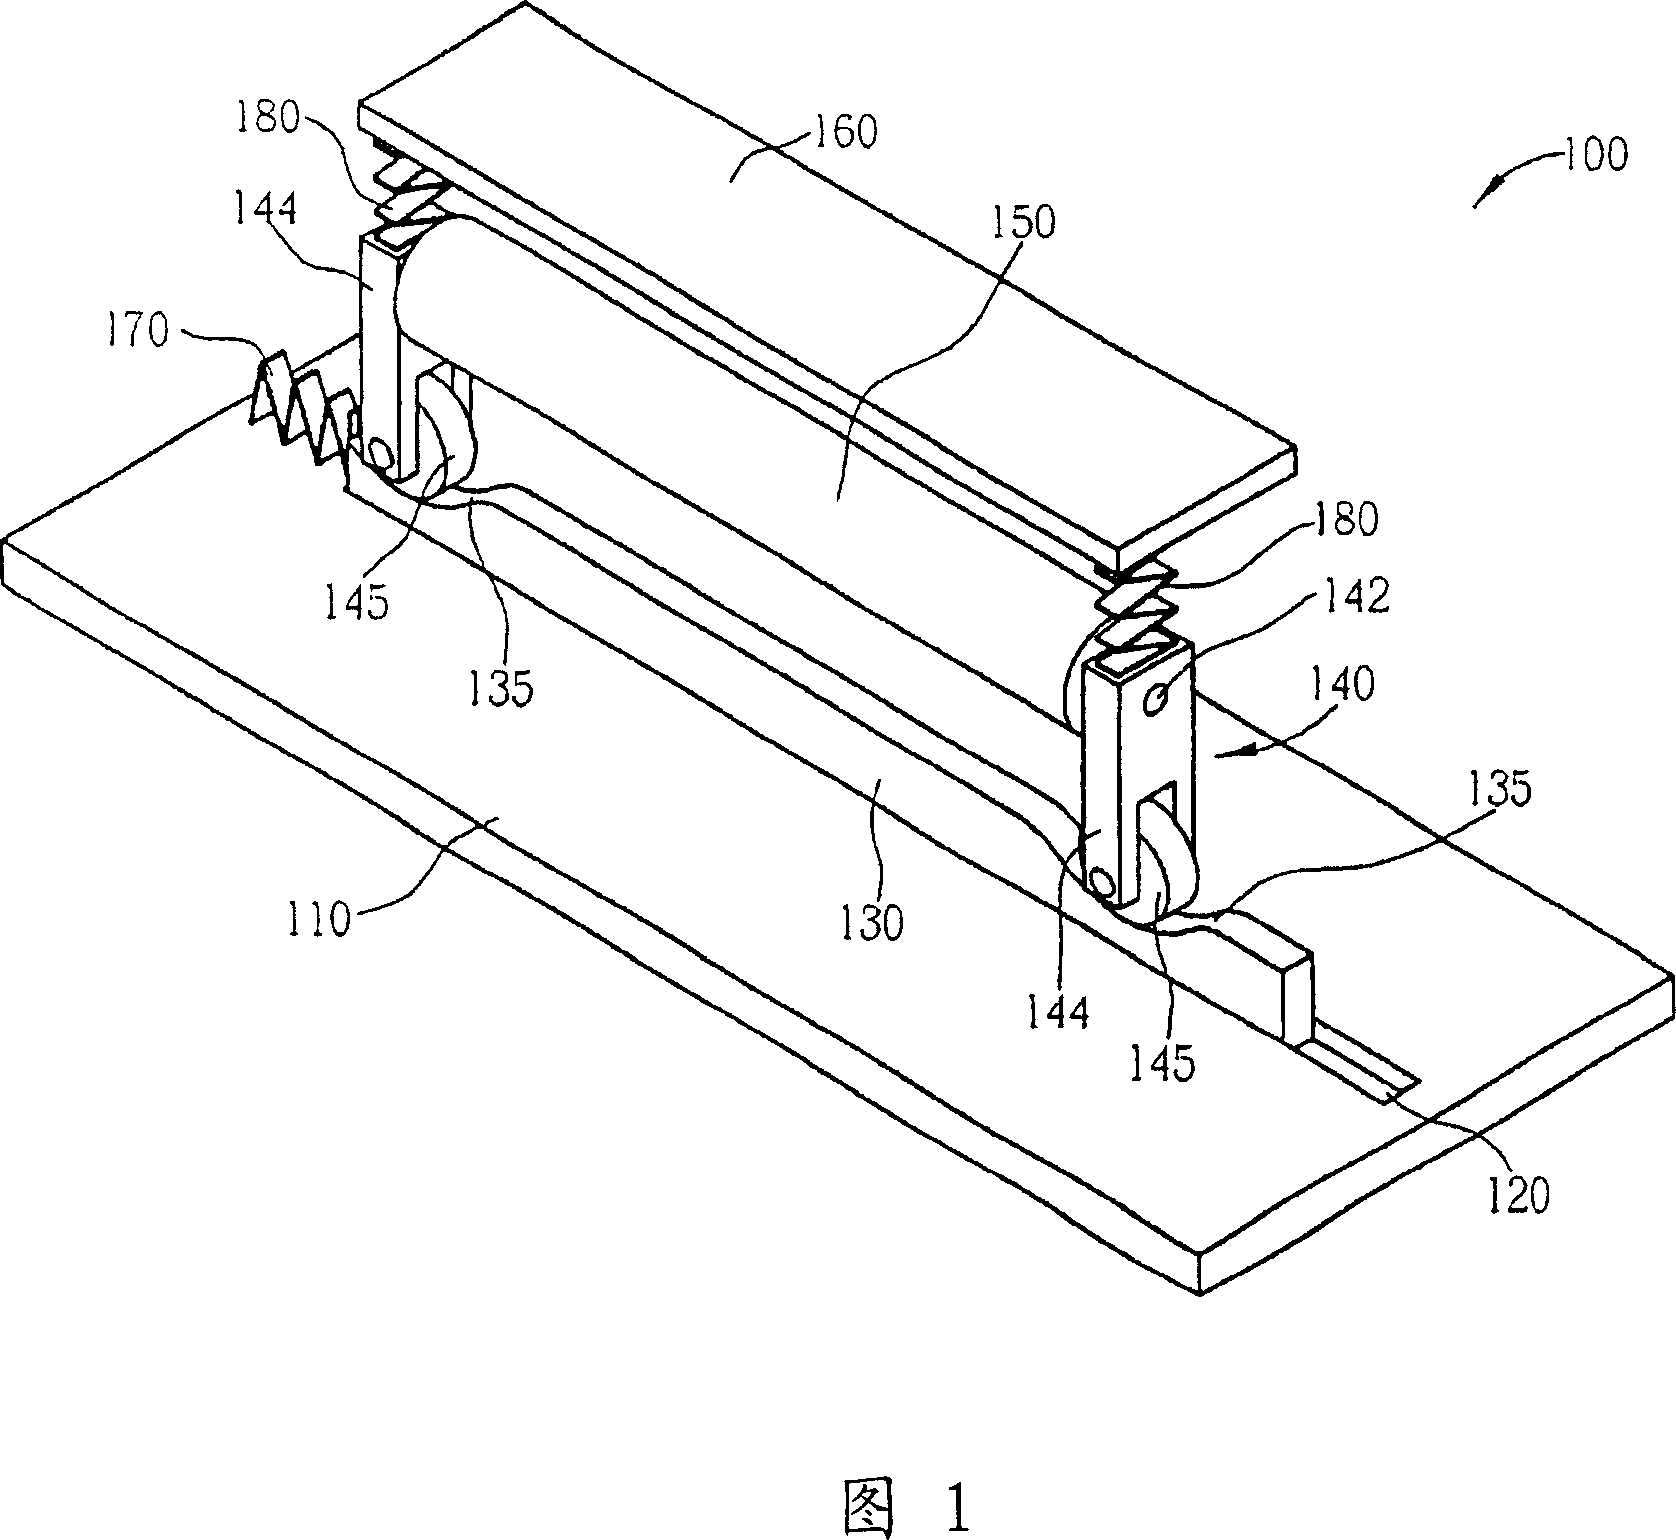 Photographic printing machine having translational cam mechanism for driving paper-pressing drum vertically lifting/lowering